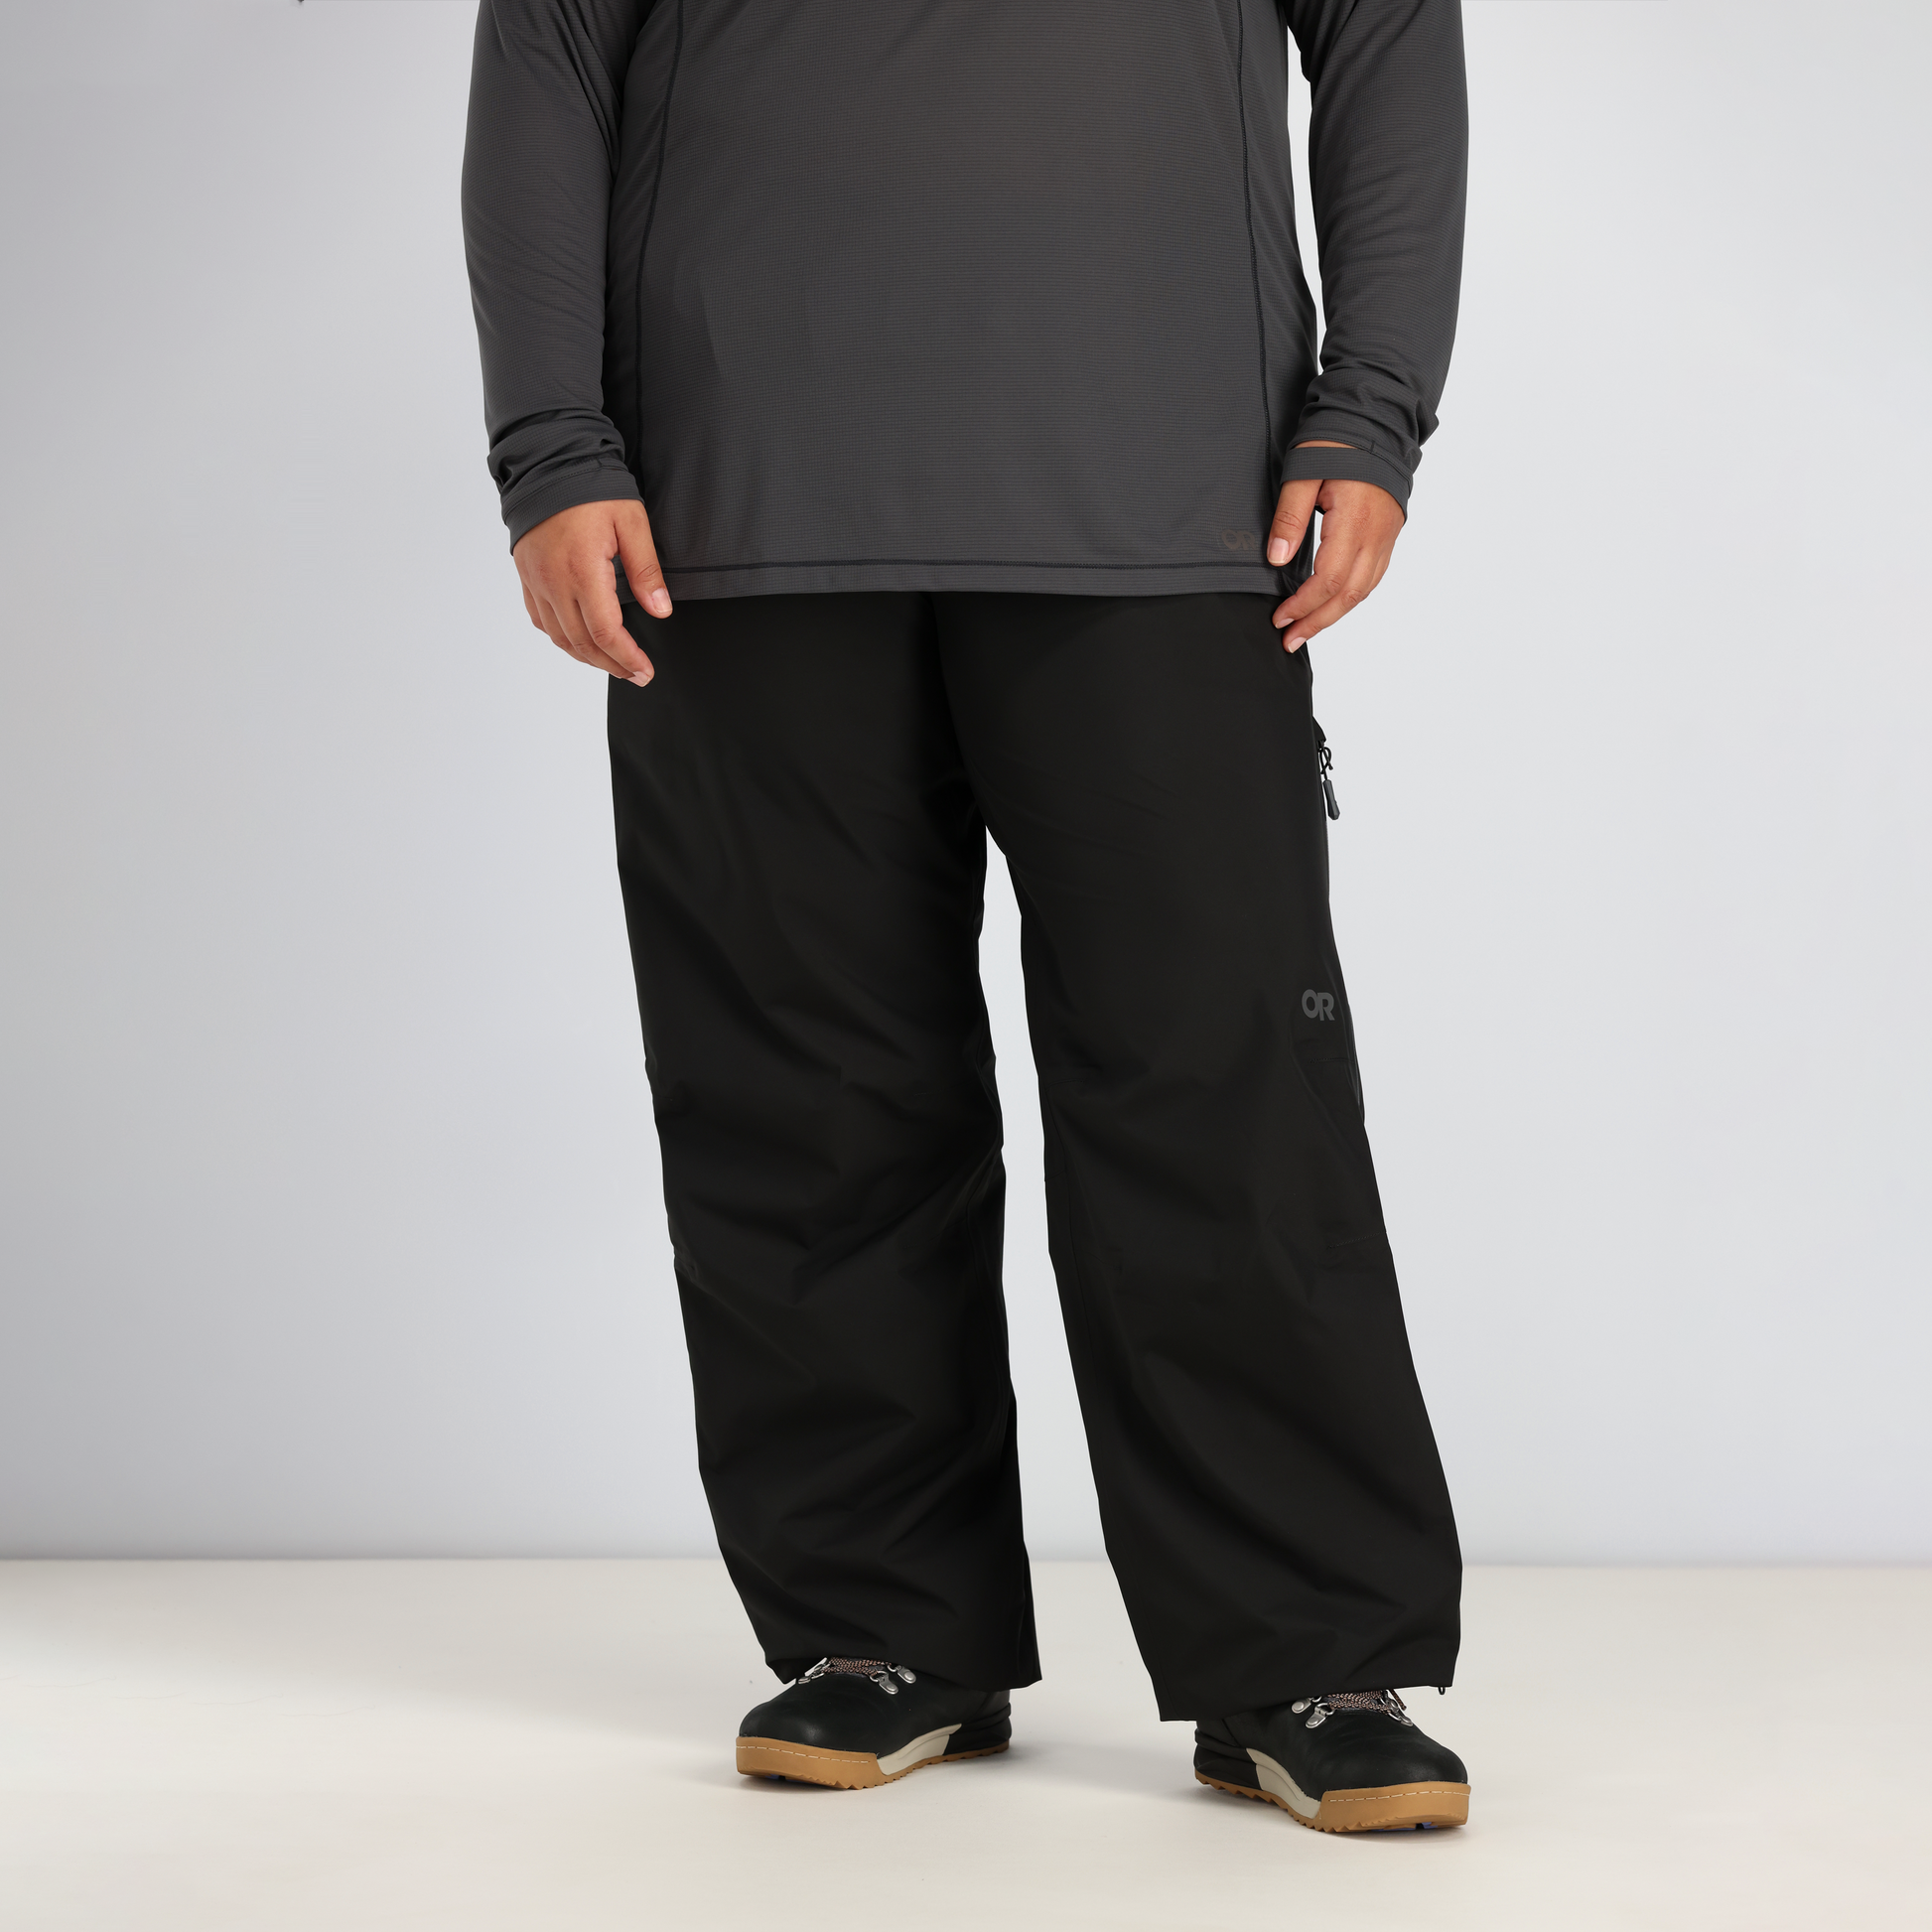 Outdoor Research Aspire Gore-TEX - Pantalones ligeros impermeables para  mujer